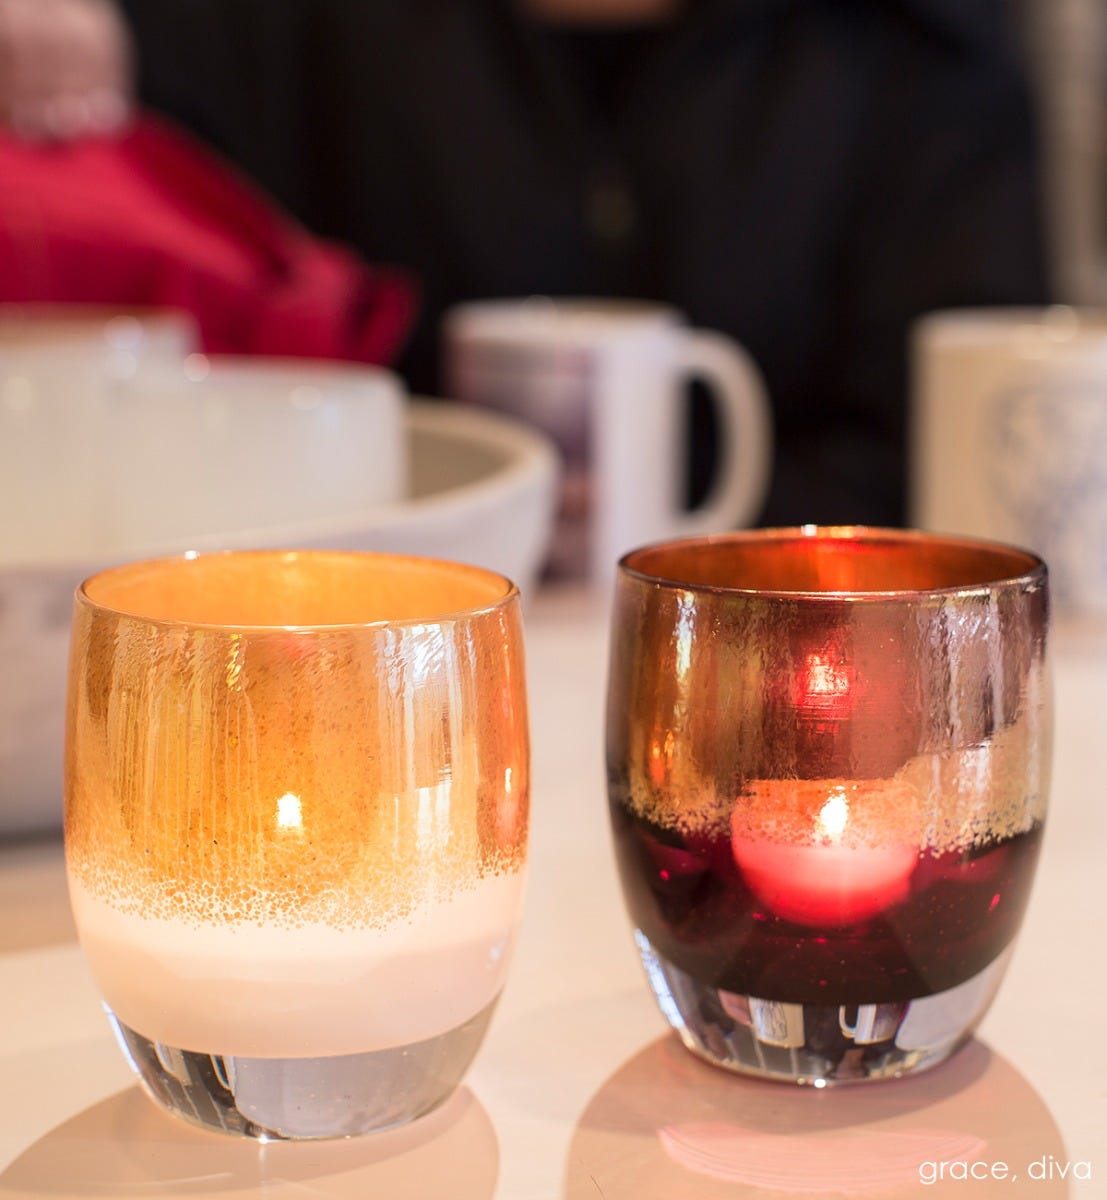 diva metallic gold on deep pink hand-blown glass votive candle holder. Paired with grace.